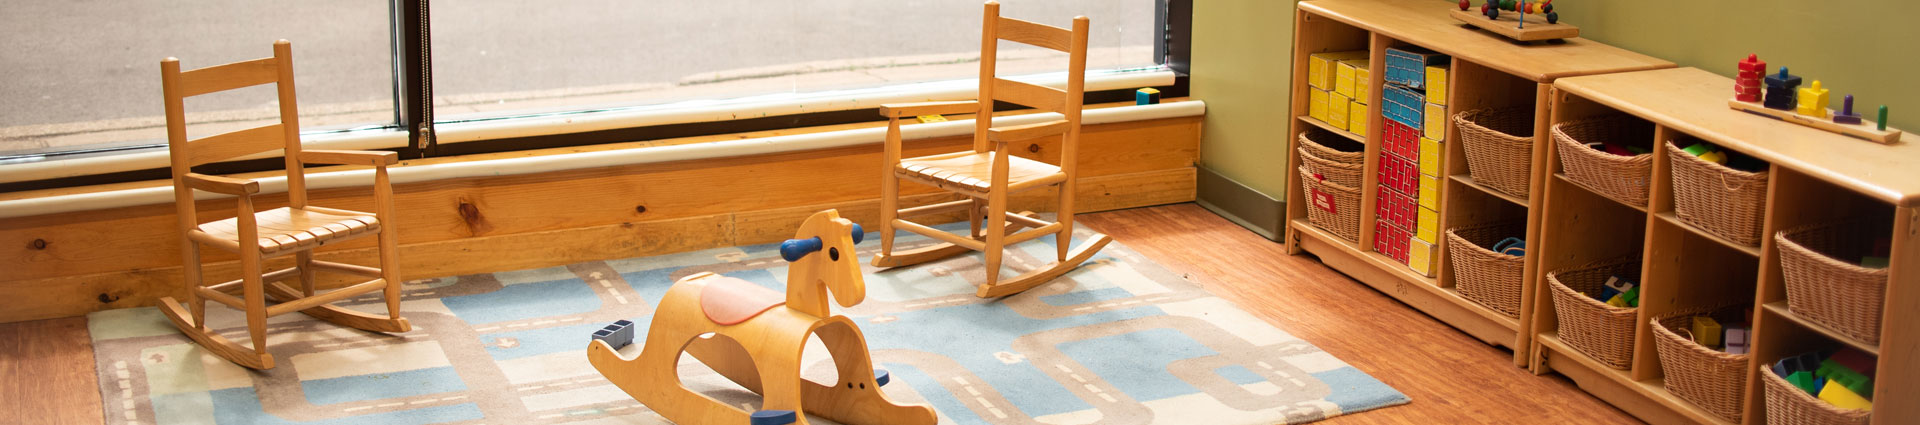 Daycare room with toddler's chairs and a rocking horse